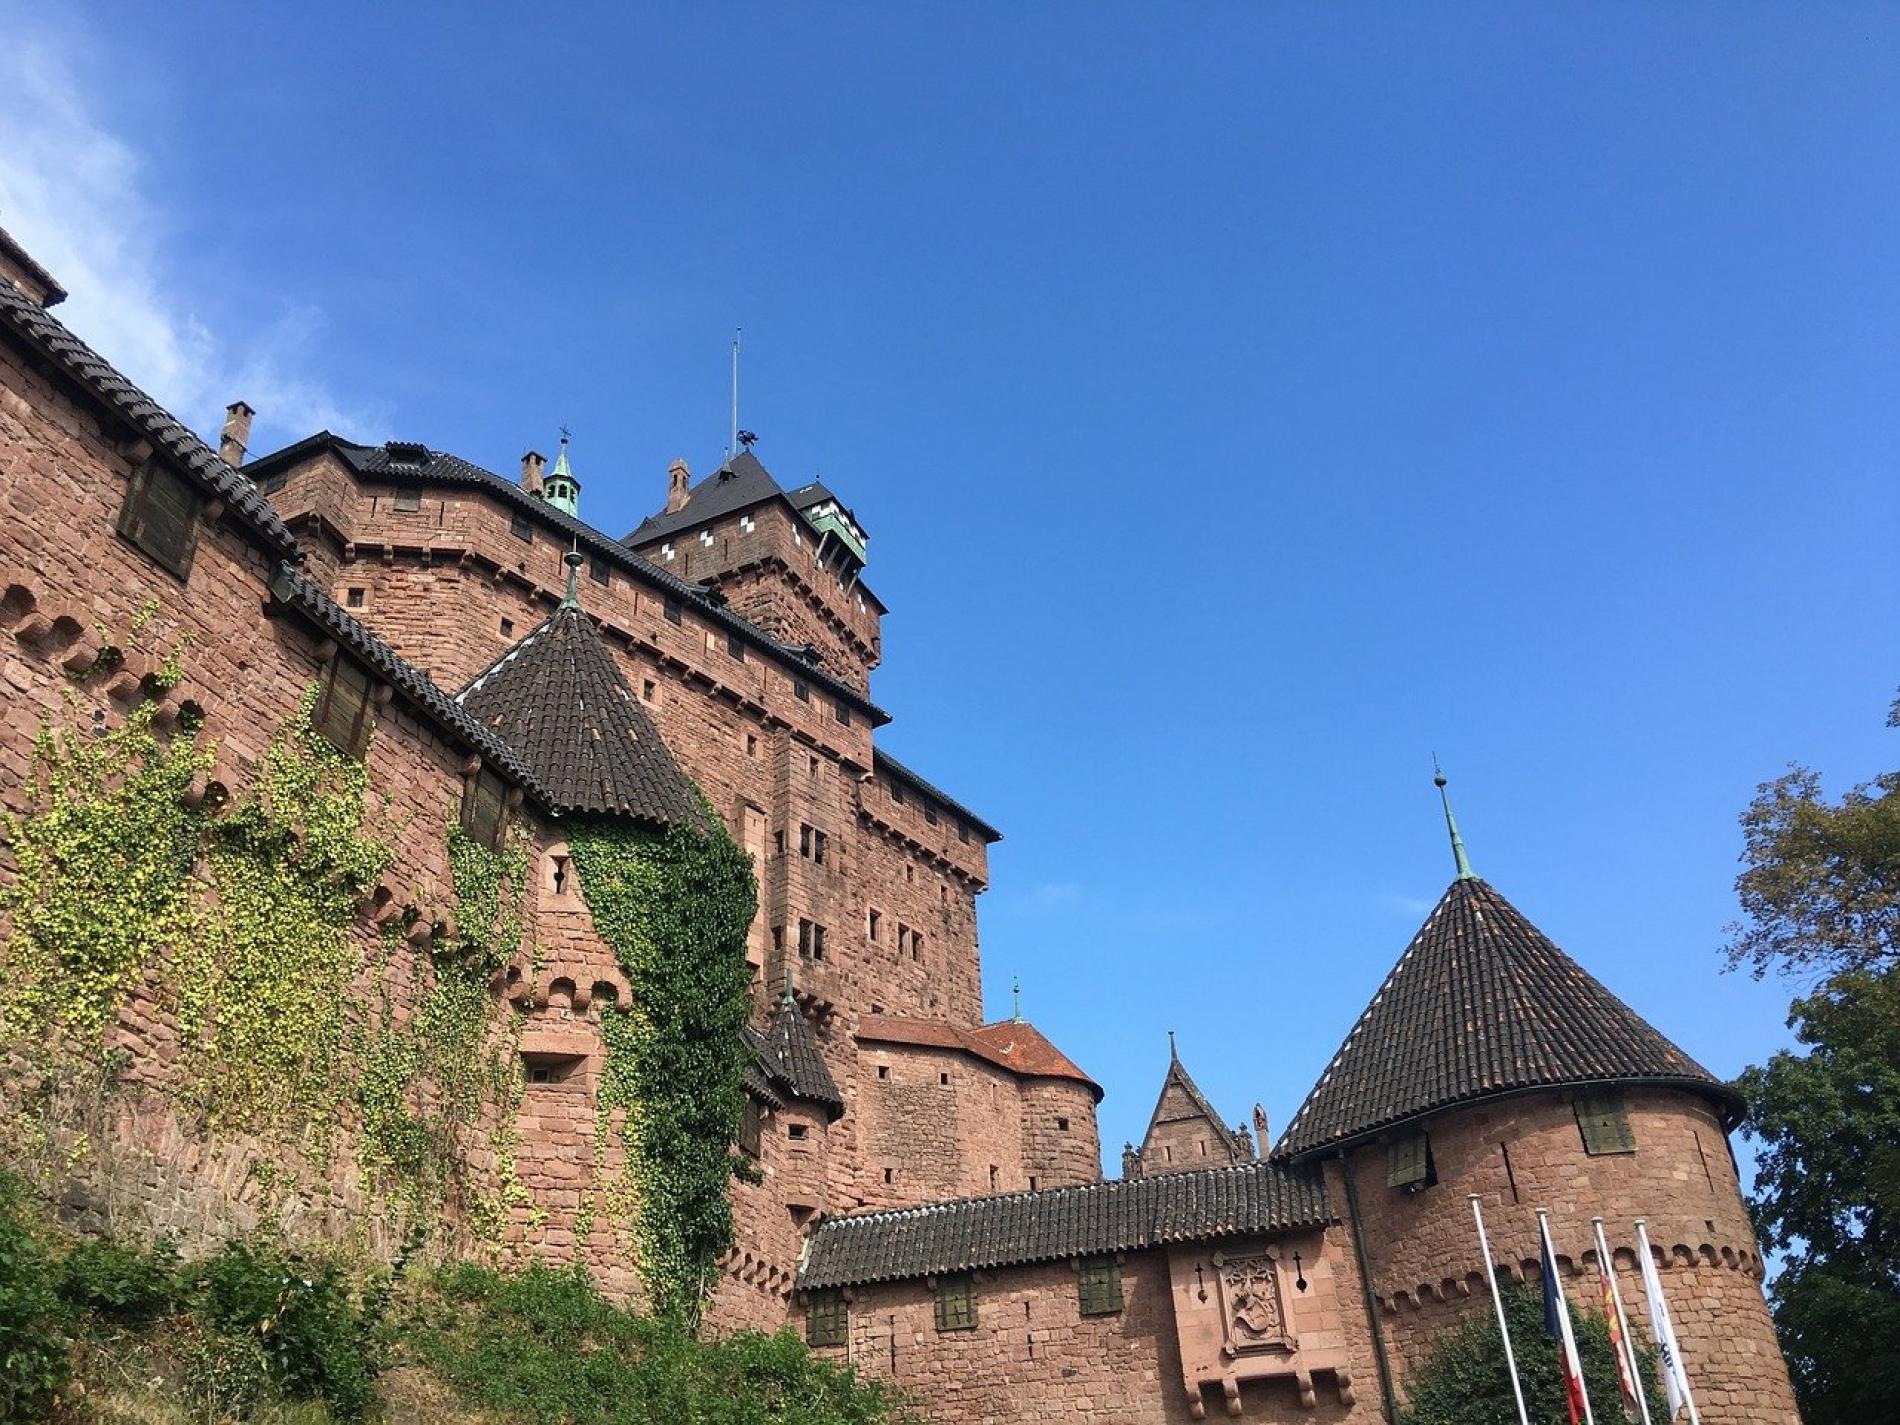 The fortified castles of Alsace